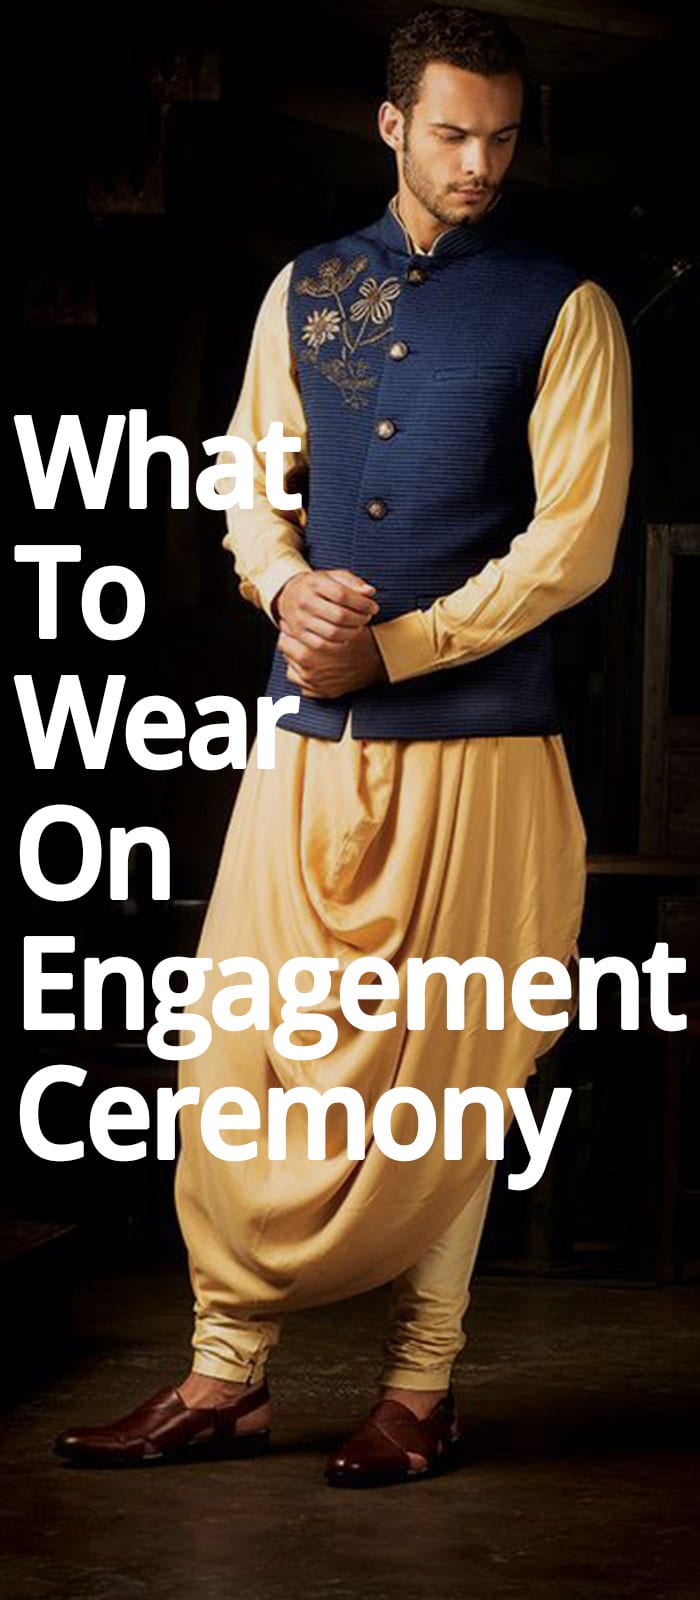 What To Wear On Engagement Ceremony